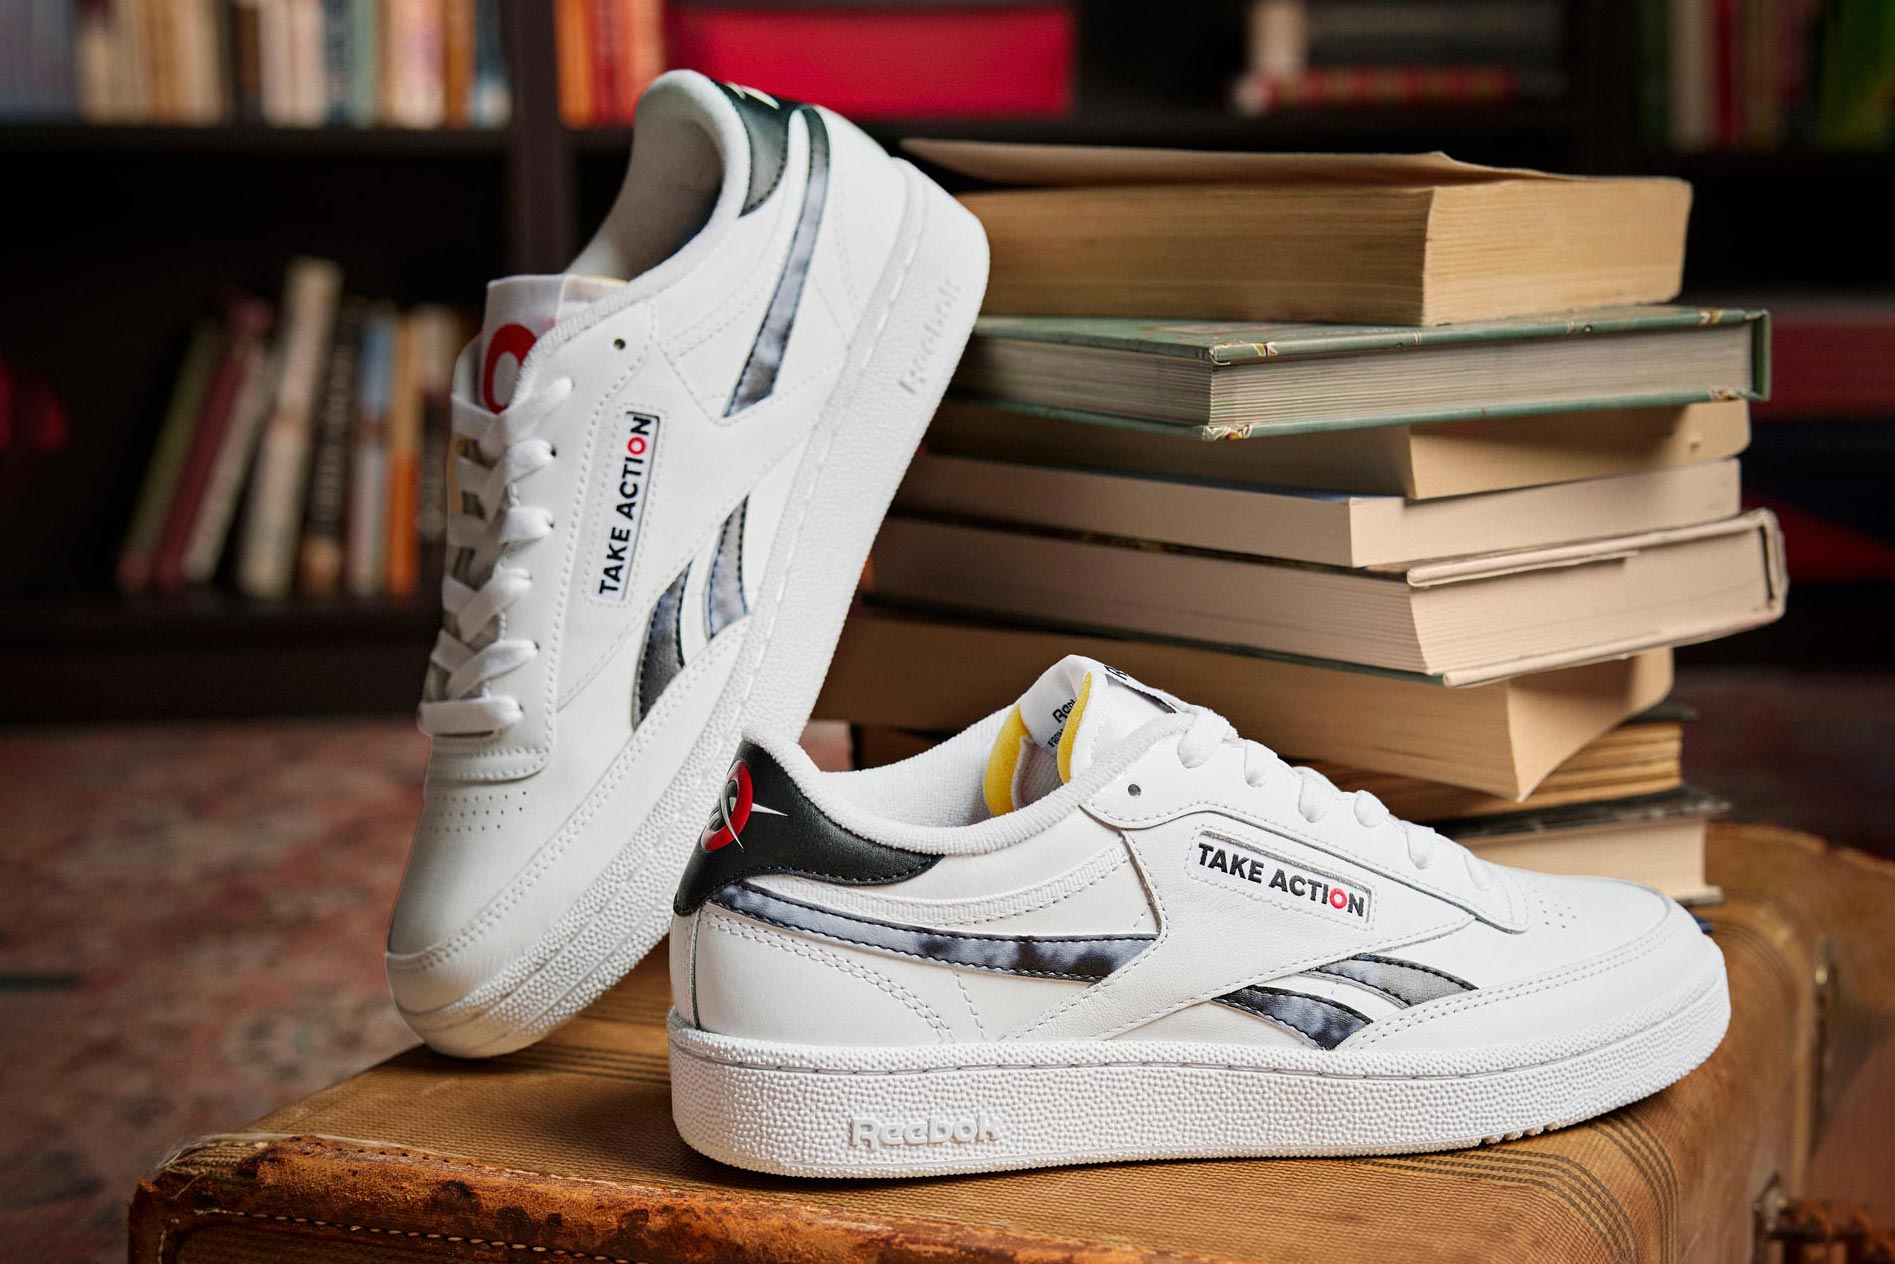 Global Citizen & Reebok Join Forces for a Collaborative Take Action Club C Revenge